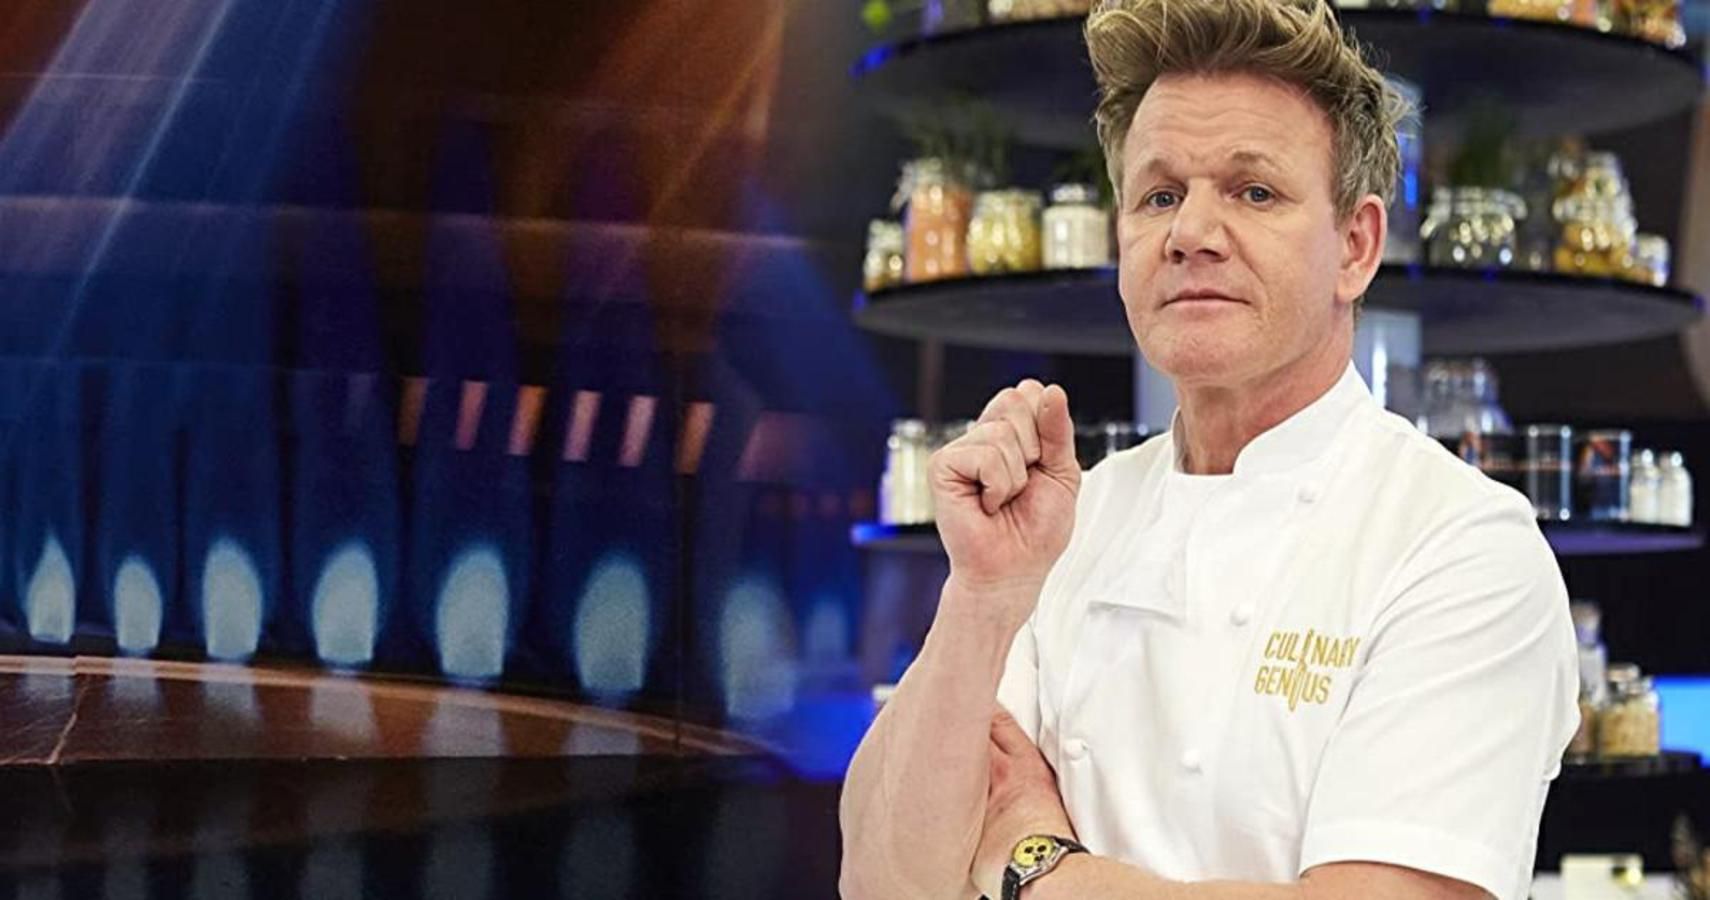 Food Network Gordon Ramsay's Shows From Worst To Best, Ranked